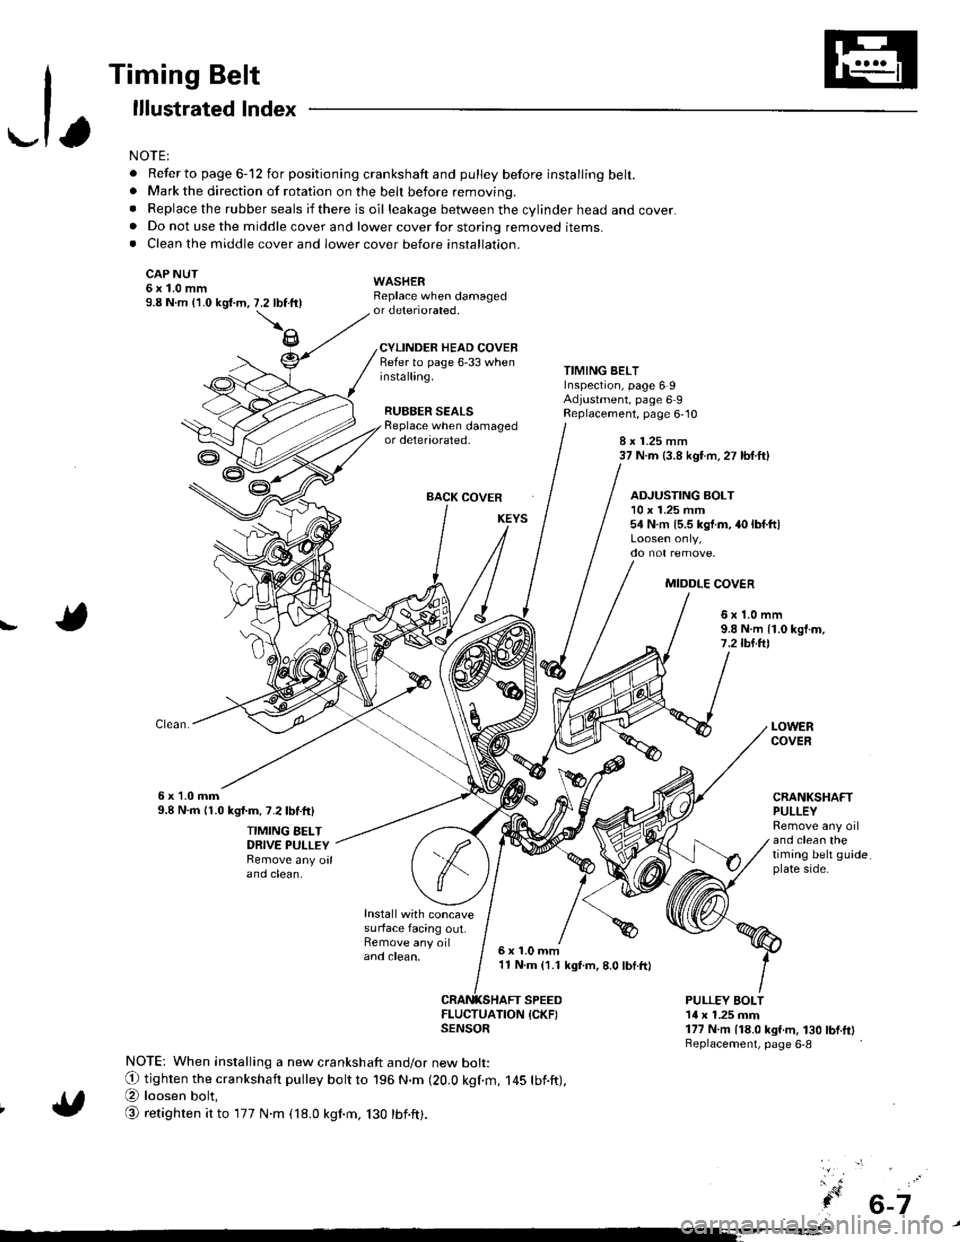 HONDA INTEGRA 1998 4.G Workshop Manual -1,
Timing Belt
lllustrated lndex
NOTE:
. Refer to page 6-12 for positioning crankshaft and pulley before installing belt.. Mark the direction of rotation on the beh before removing.
. Replace the rub